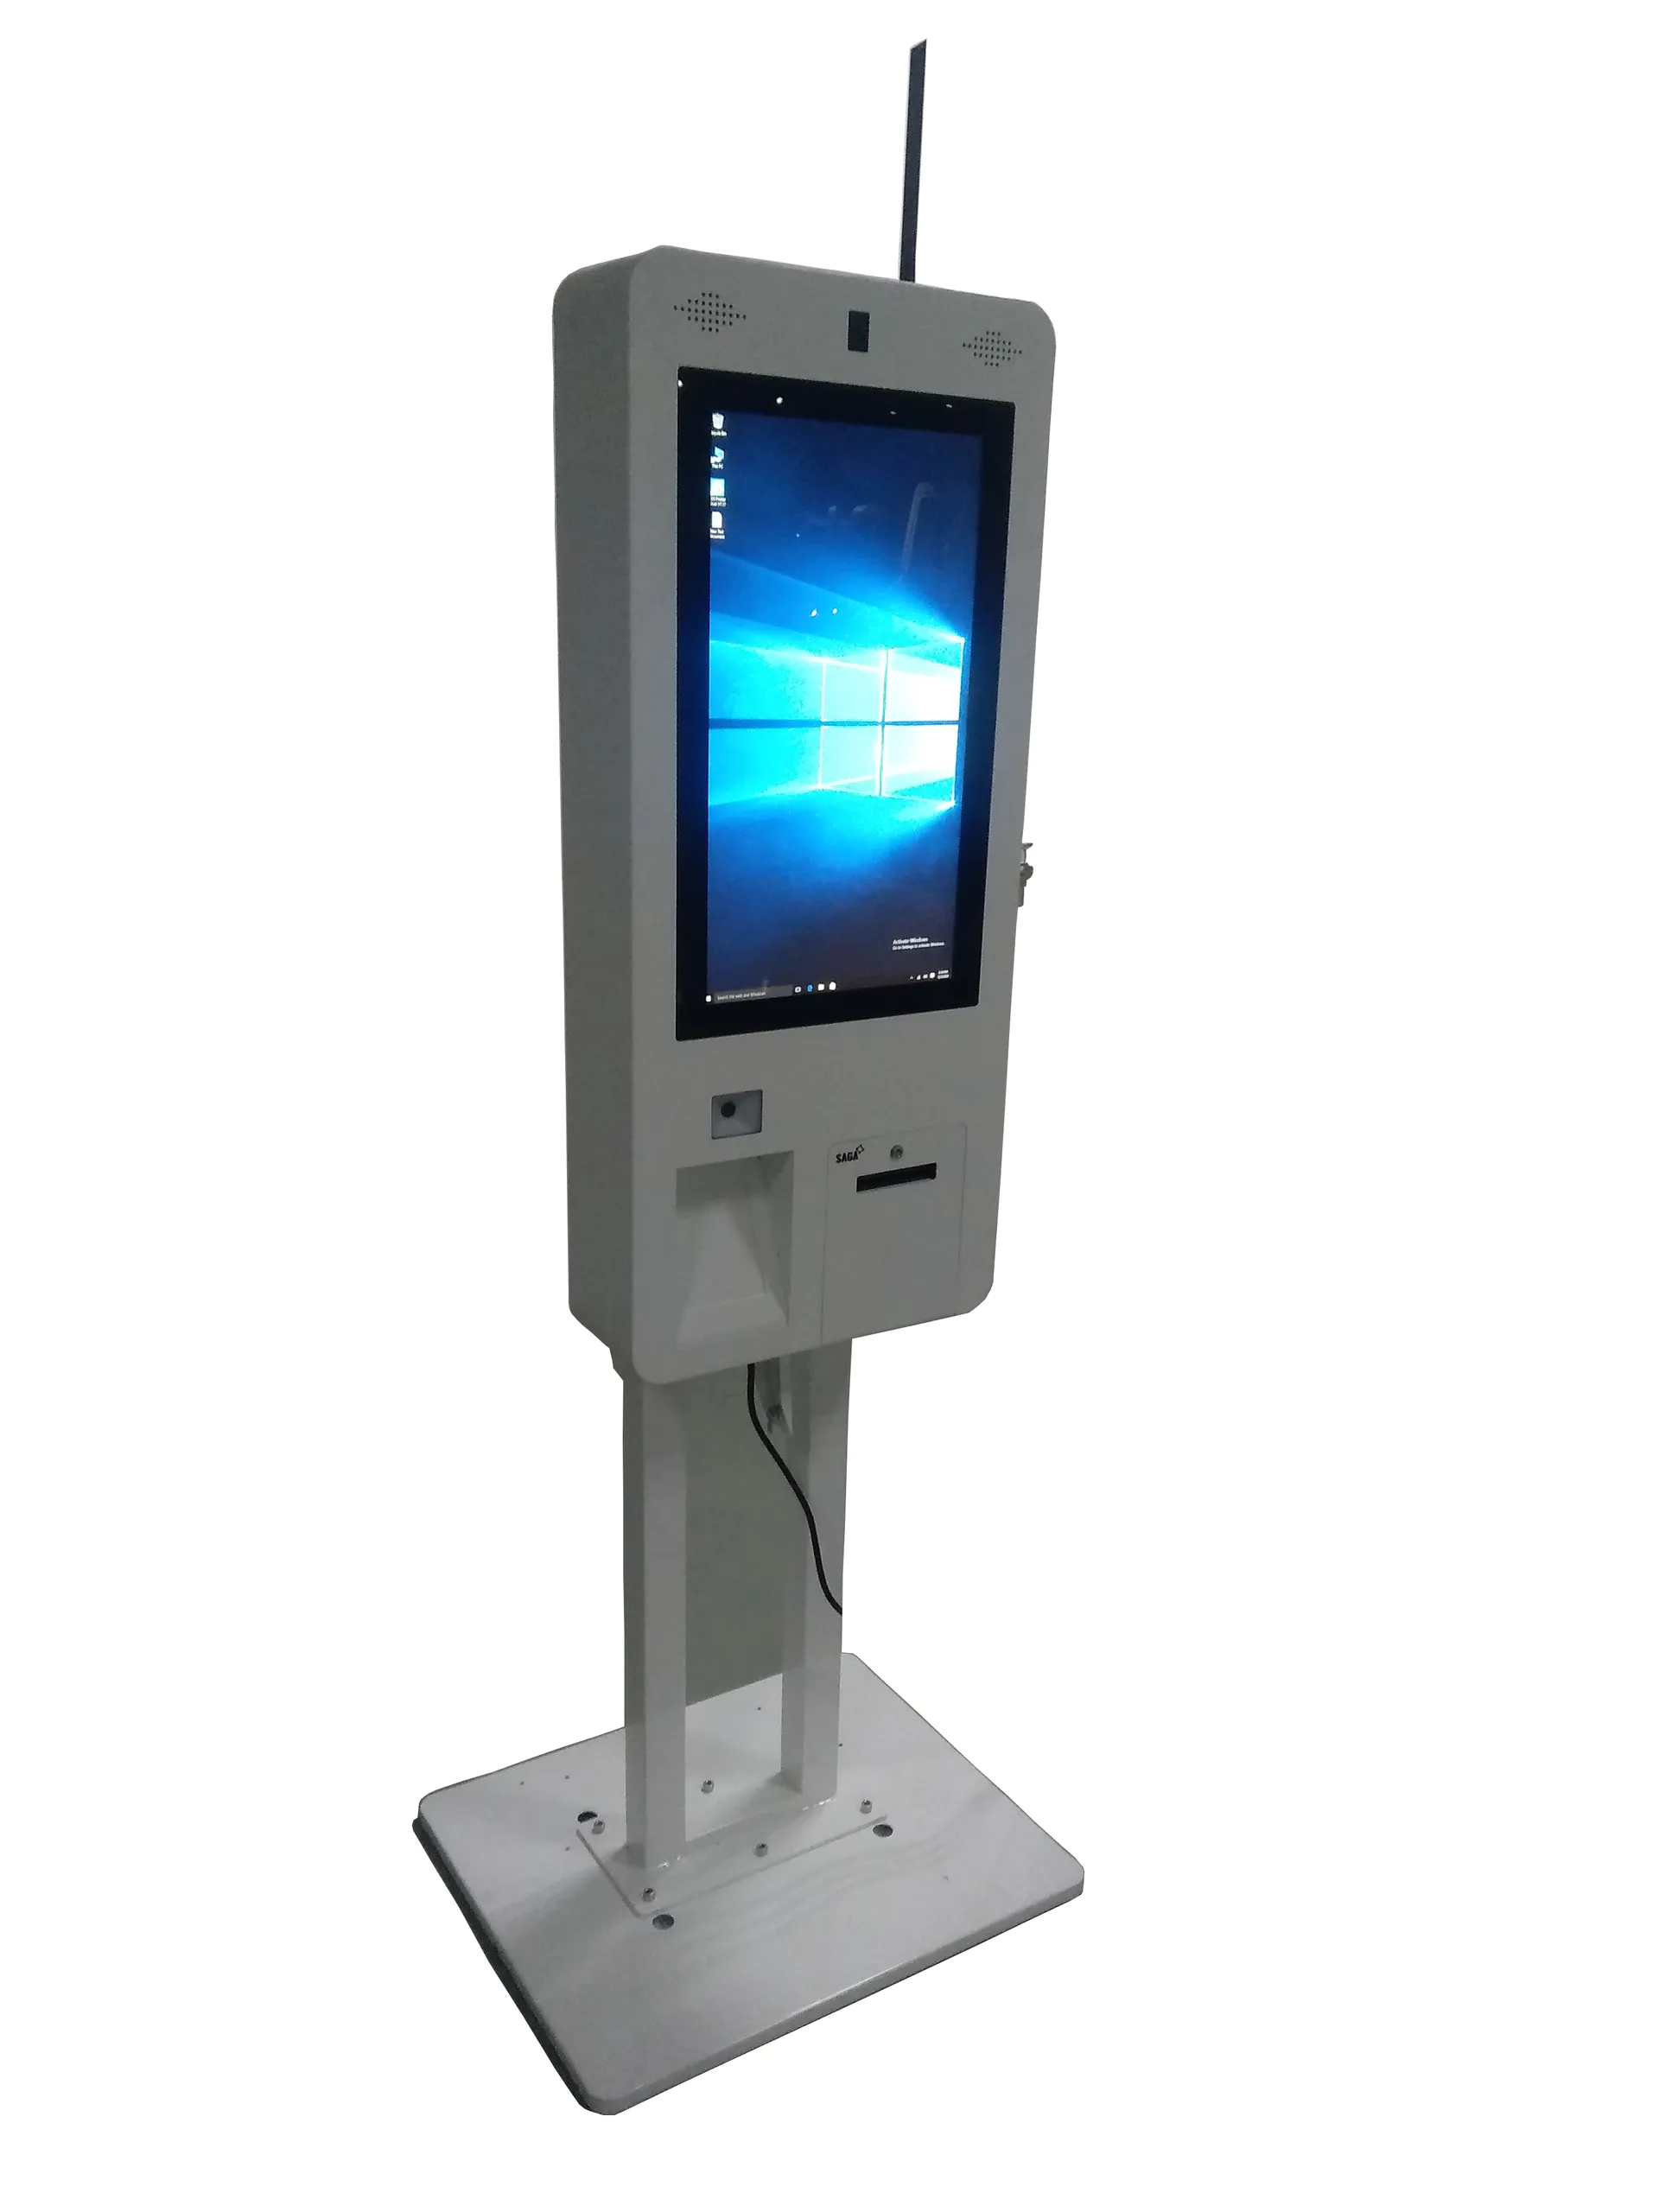 all-in-one tailormade digital signage restaurant kiosk with QR code scanner and printing